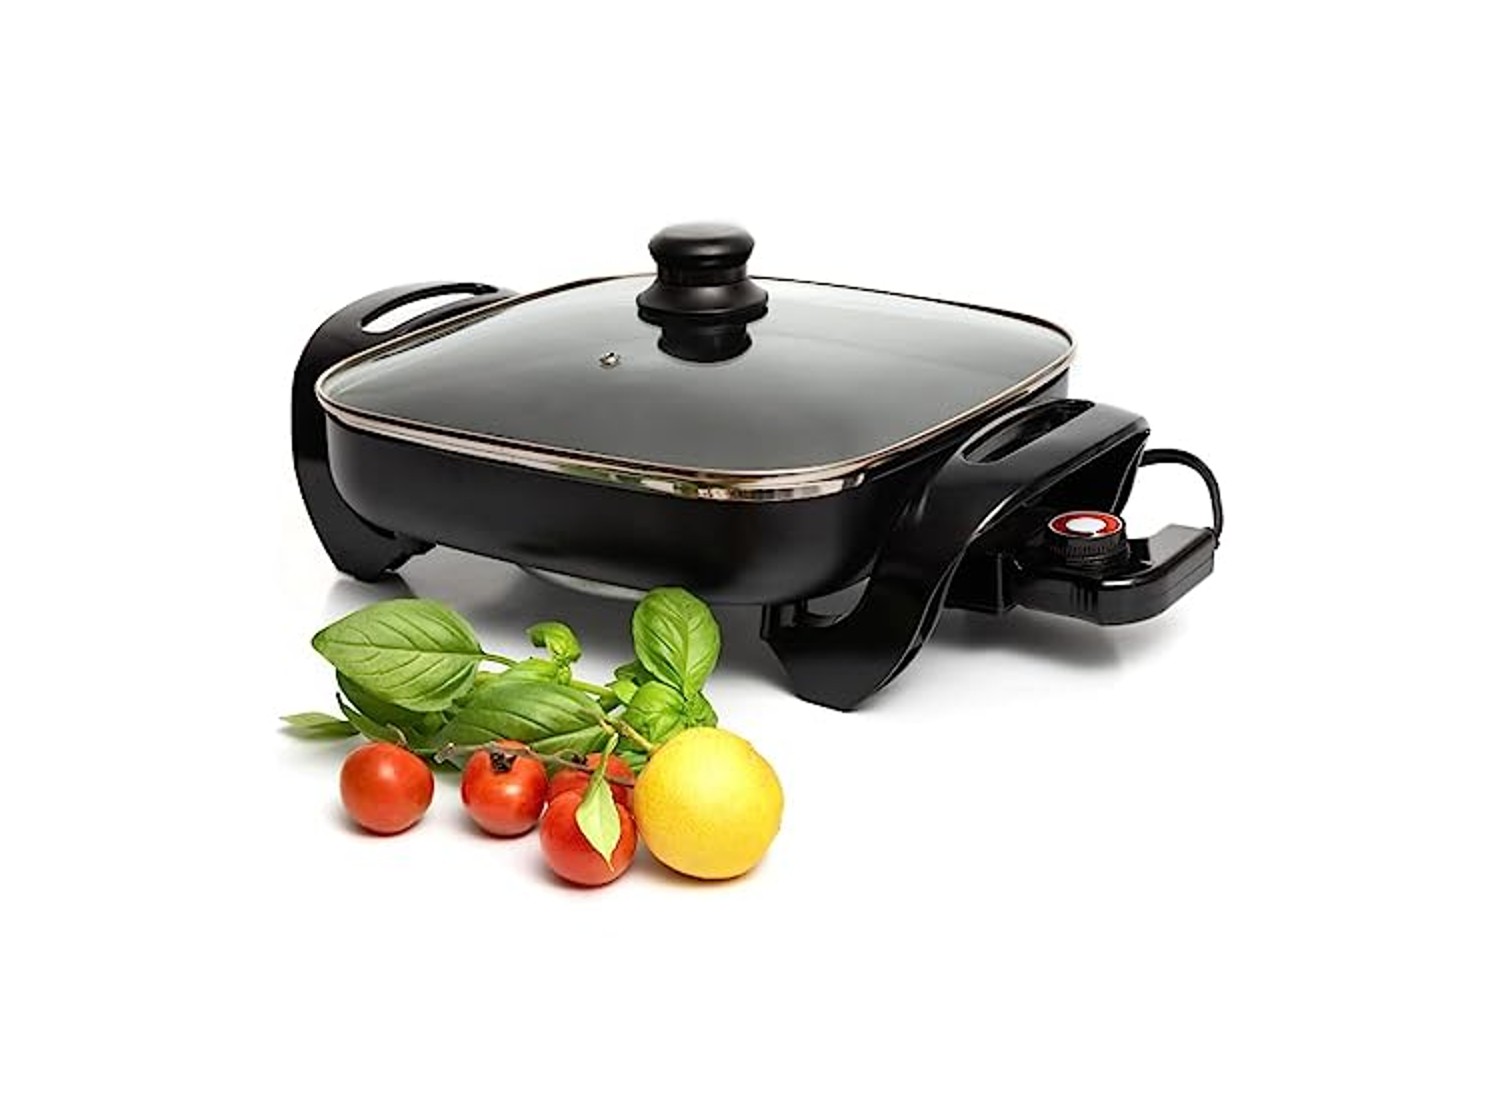 https://www.brit.co/reviews/wp-content/uploads/2023/07/moss-stone-electric-skillet-britco.jpg